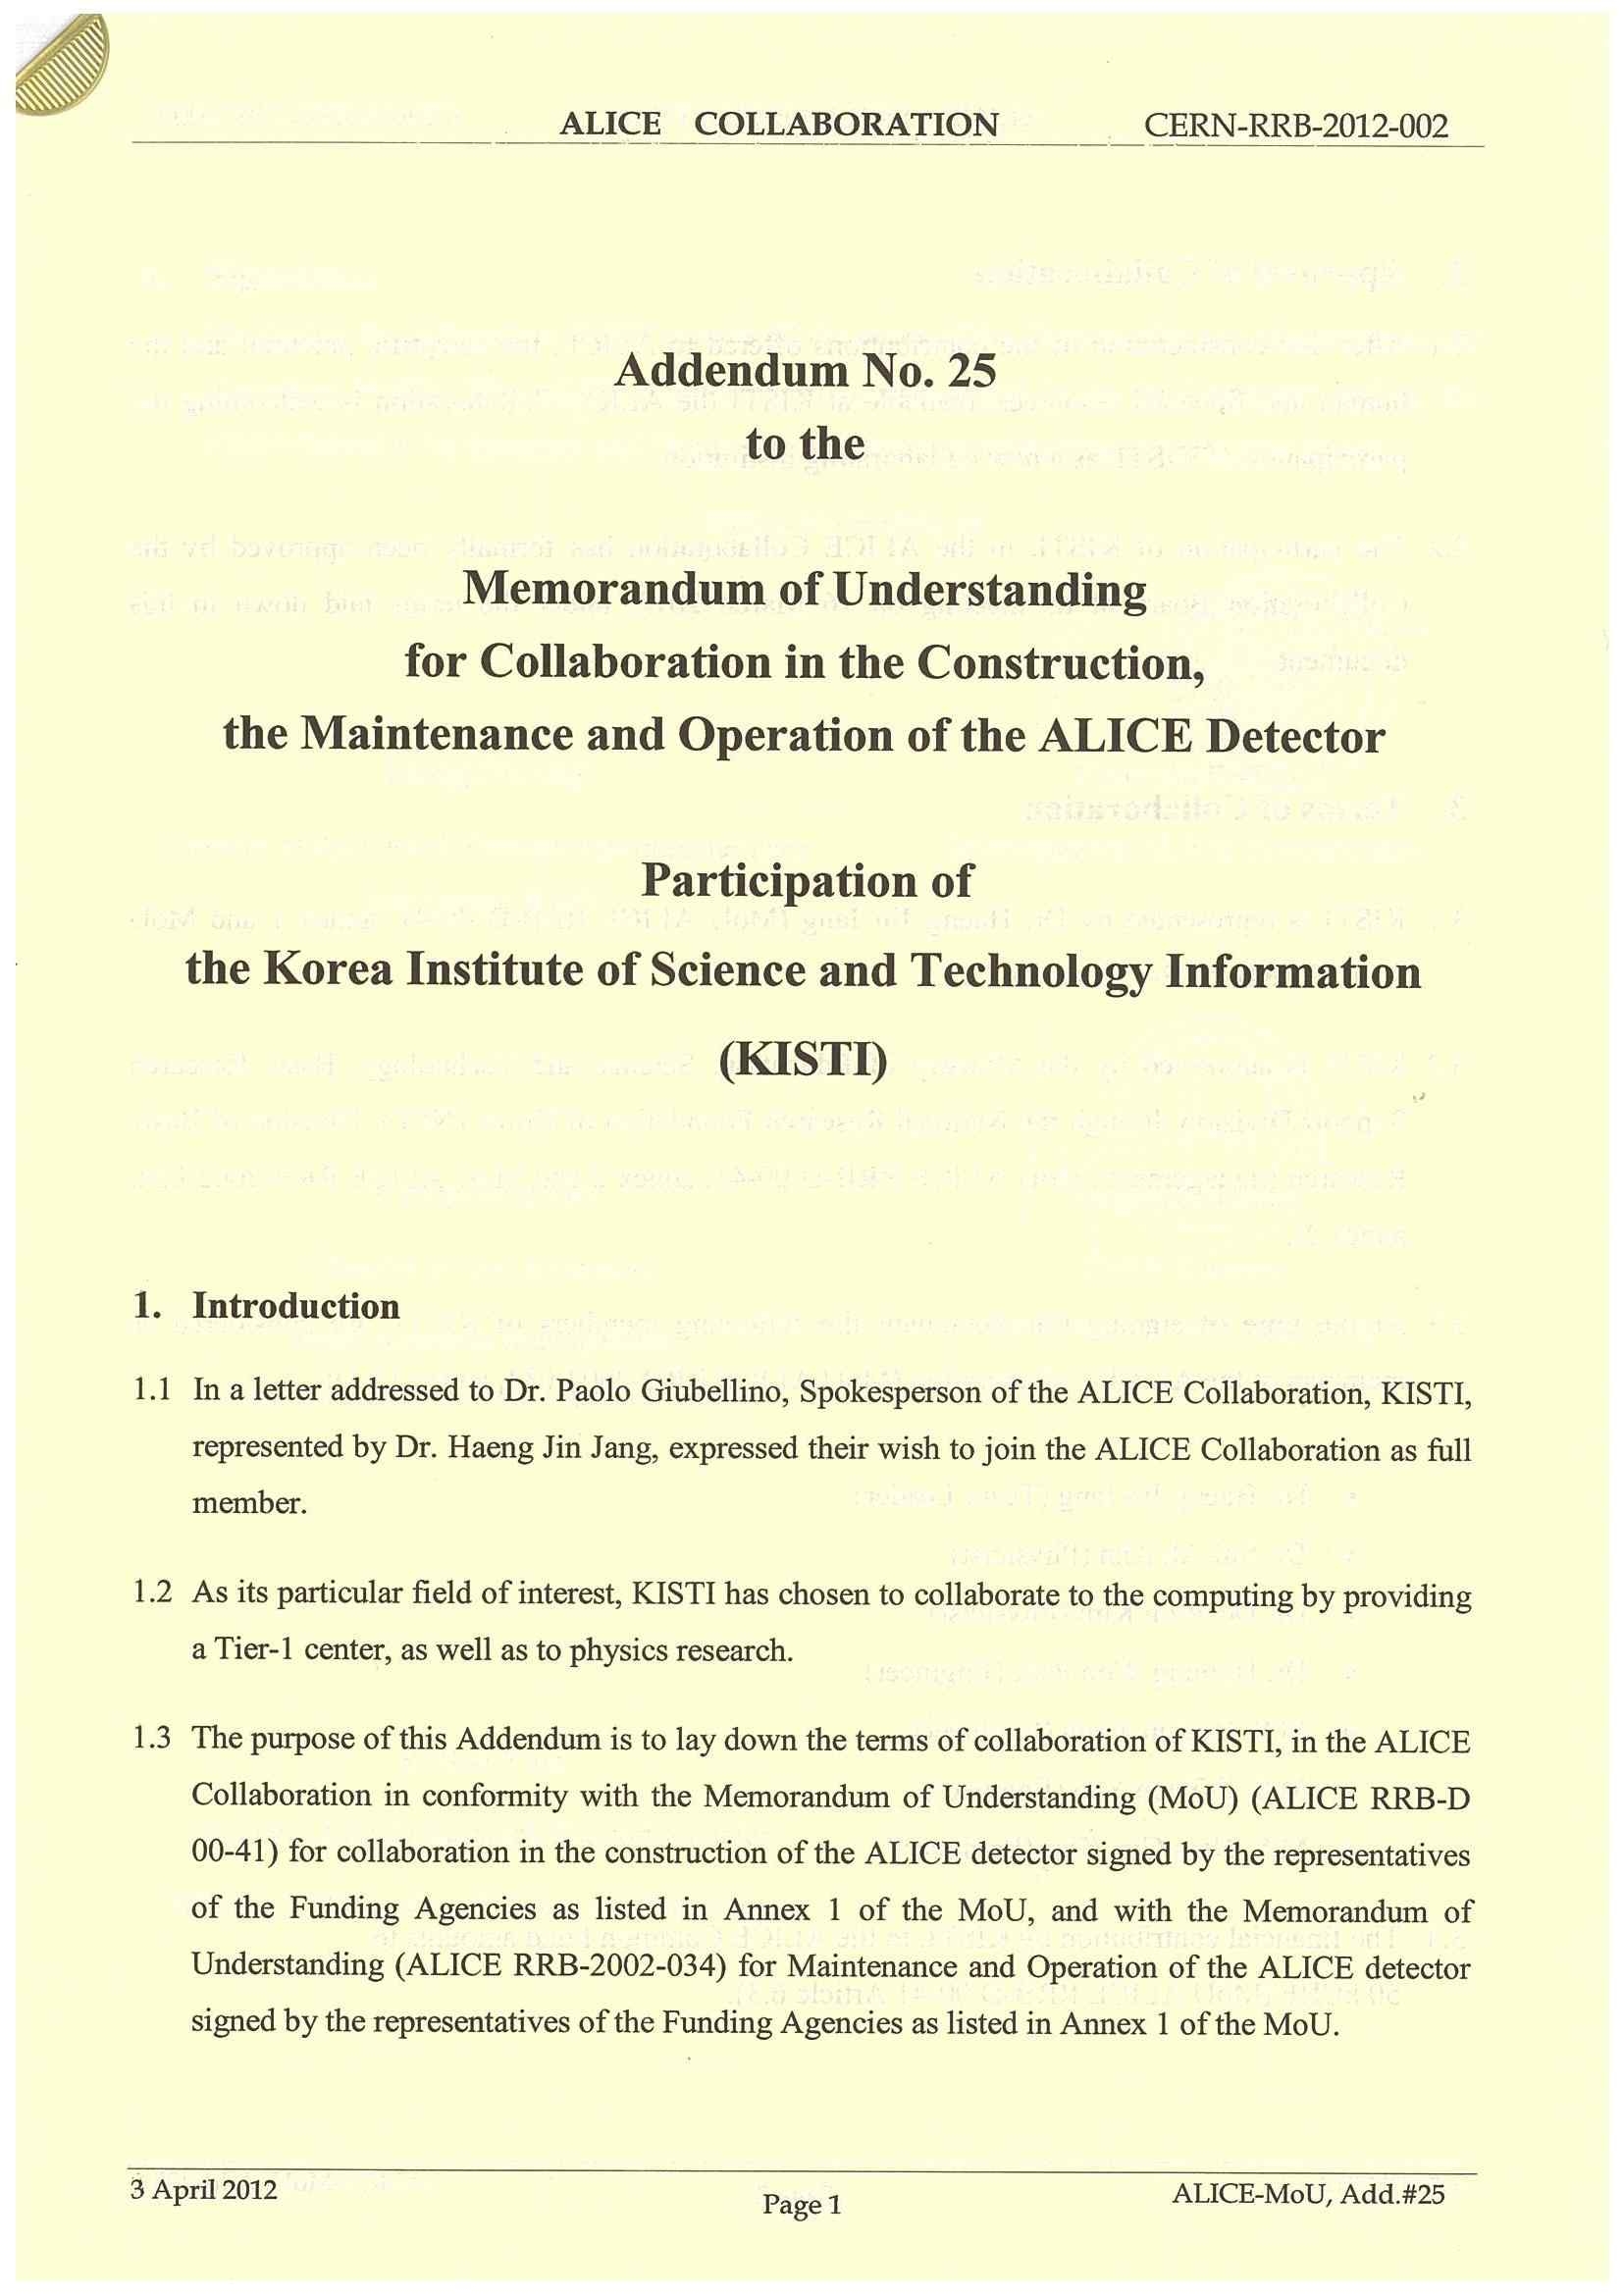 MoU for the ALICE Collaboration: Participation of KISTI (page1)